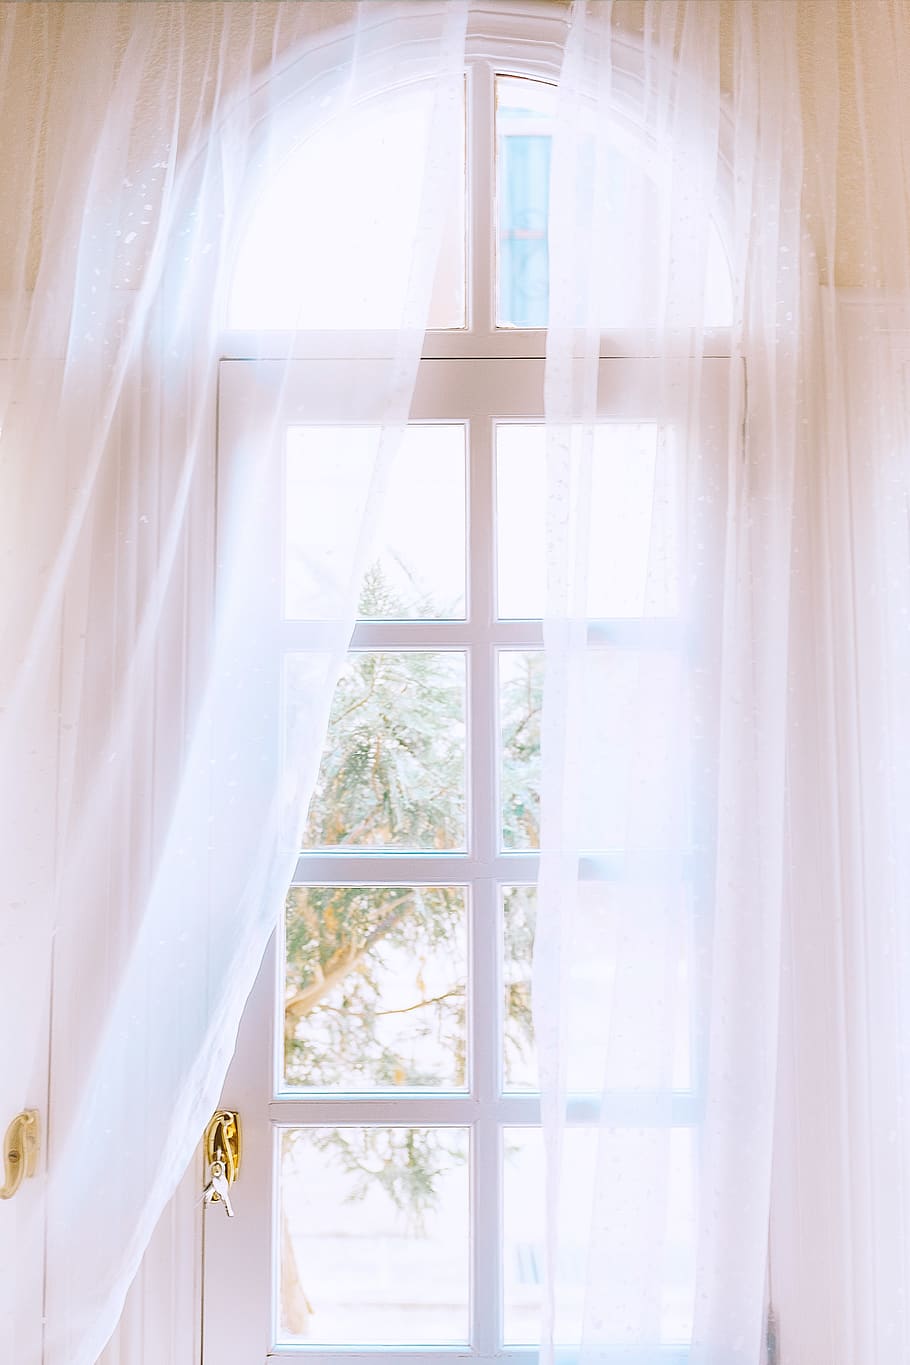 white curtain in white wooden framed window, plant, picture window